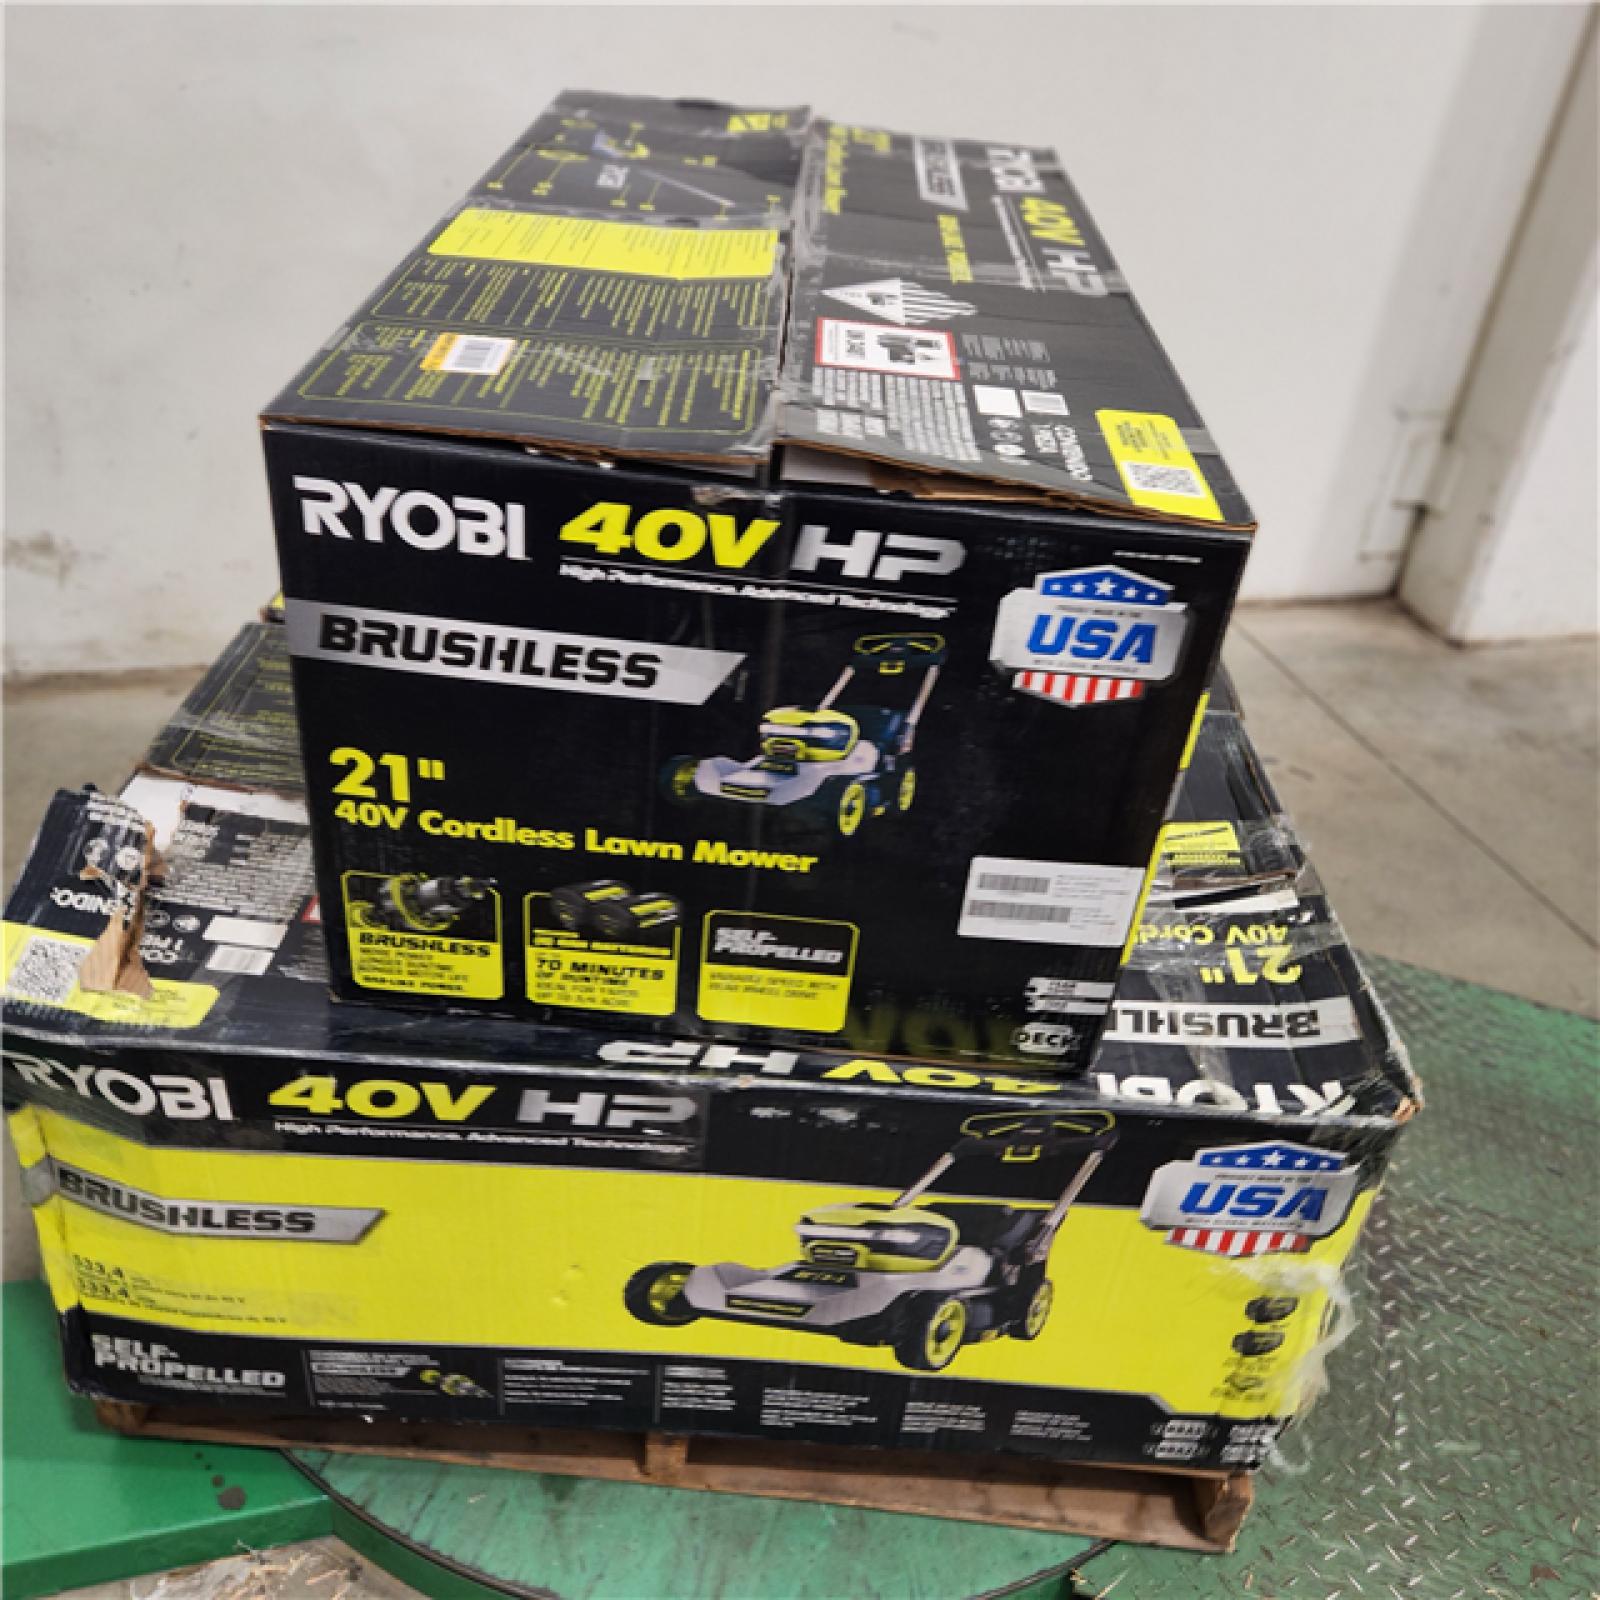 Dallas Location - As-Is RYOBI 40V HP Brushless 21 in.Self-Propelled Lawn Mower with (2) 6.0 Ah Batteries and Charger(Lot Of 3)